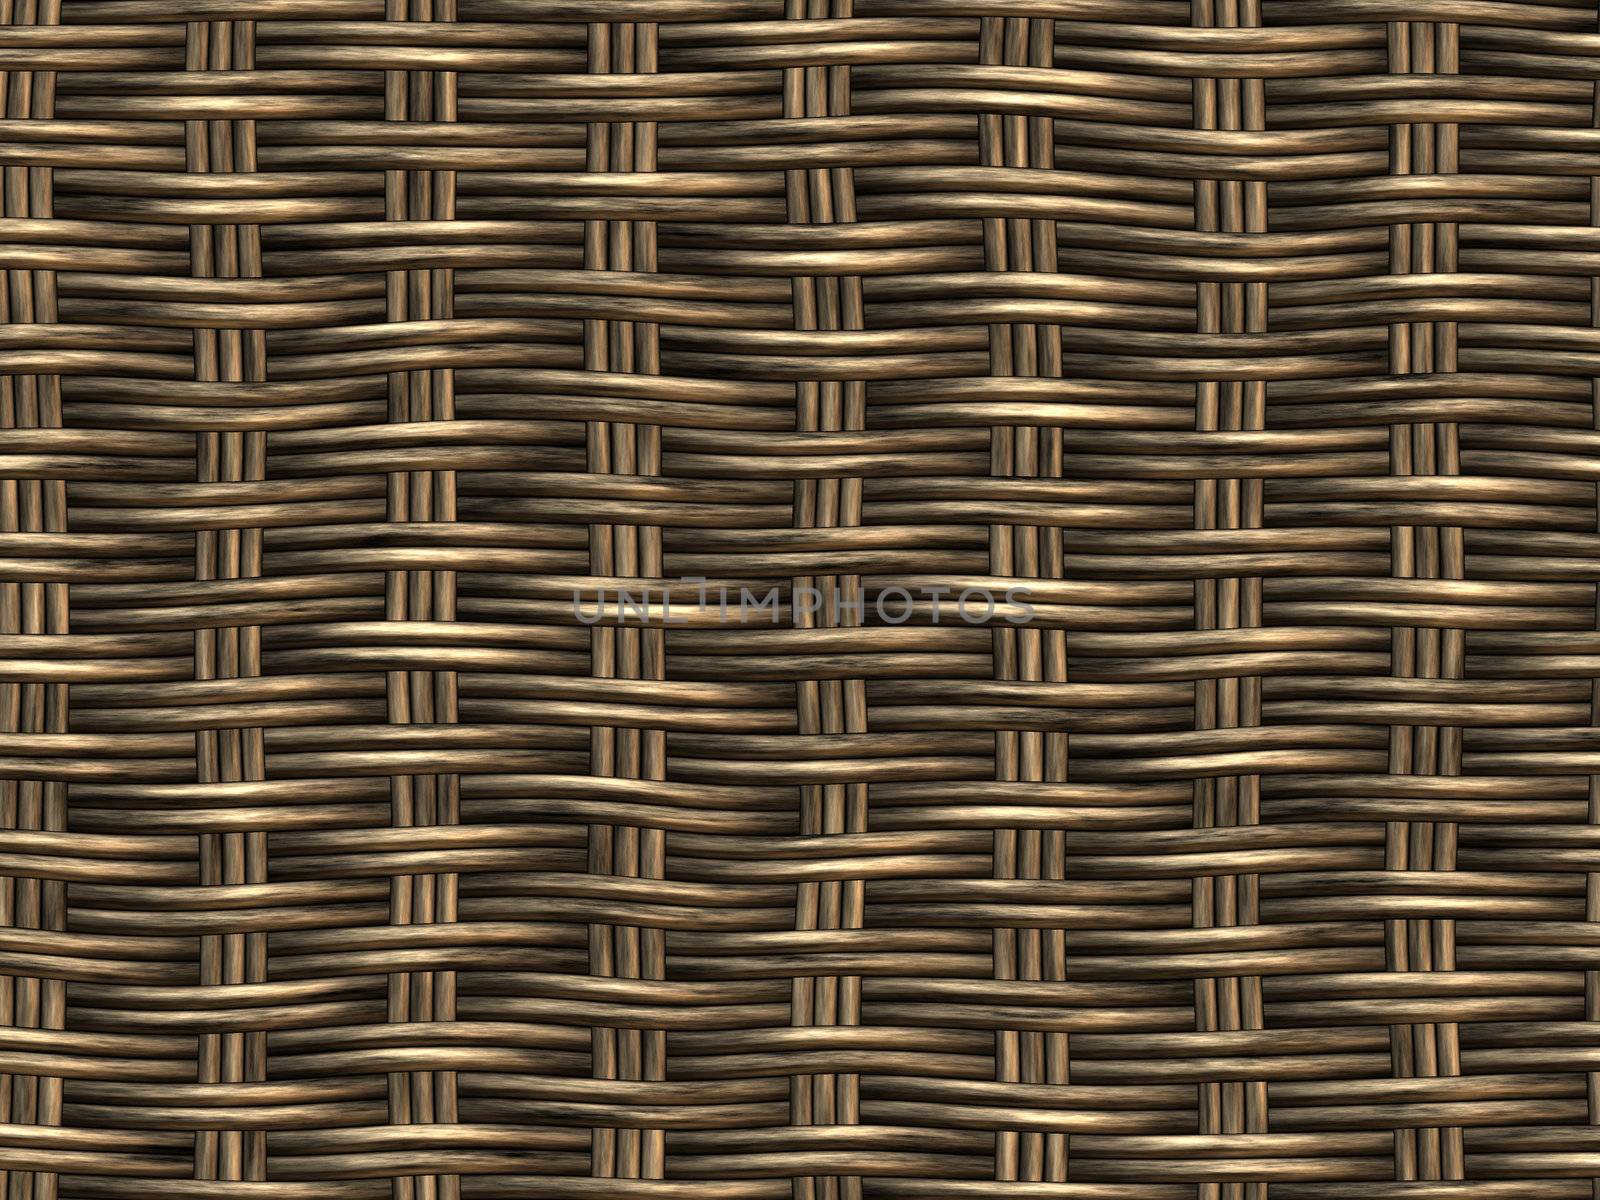 Basket Woven Seamless Background Hyper-Realistic Illustration (close-up detail)